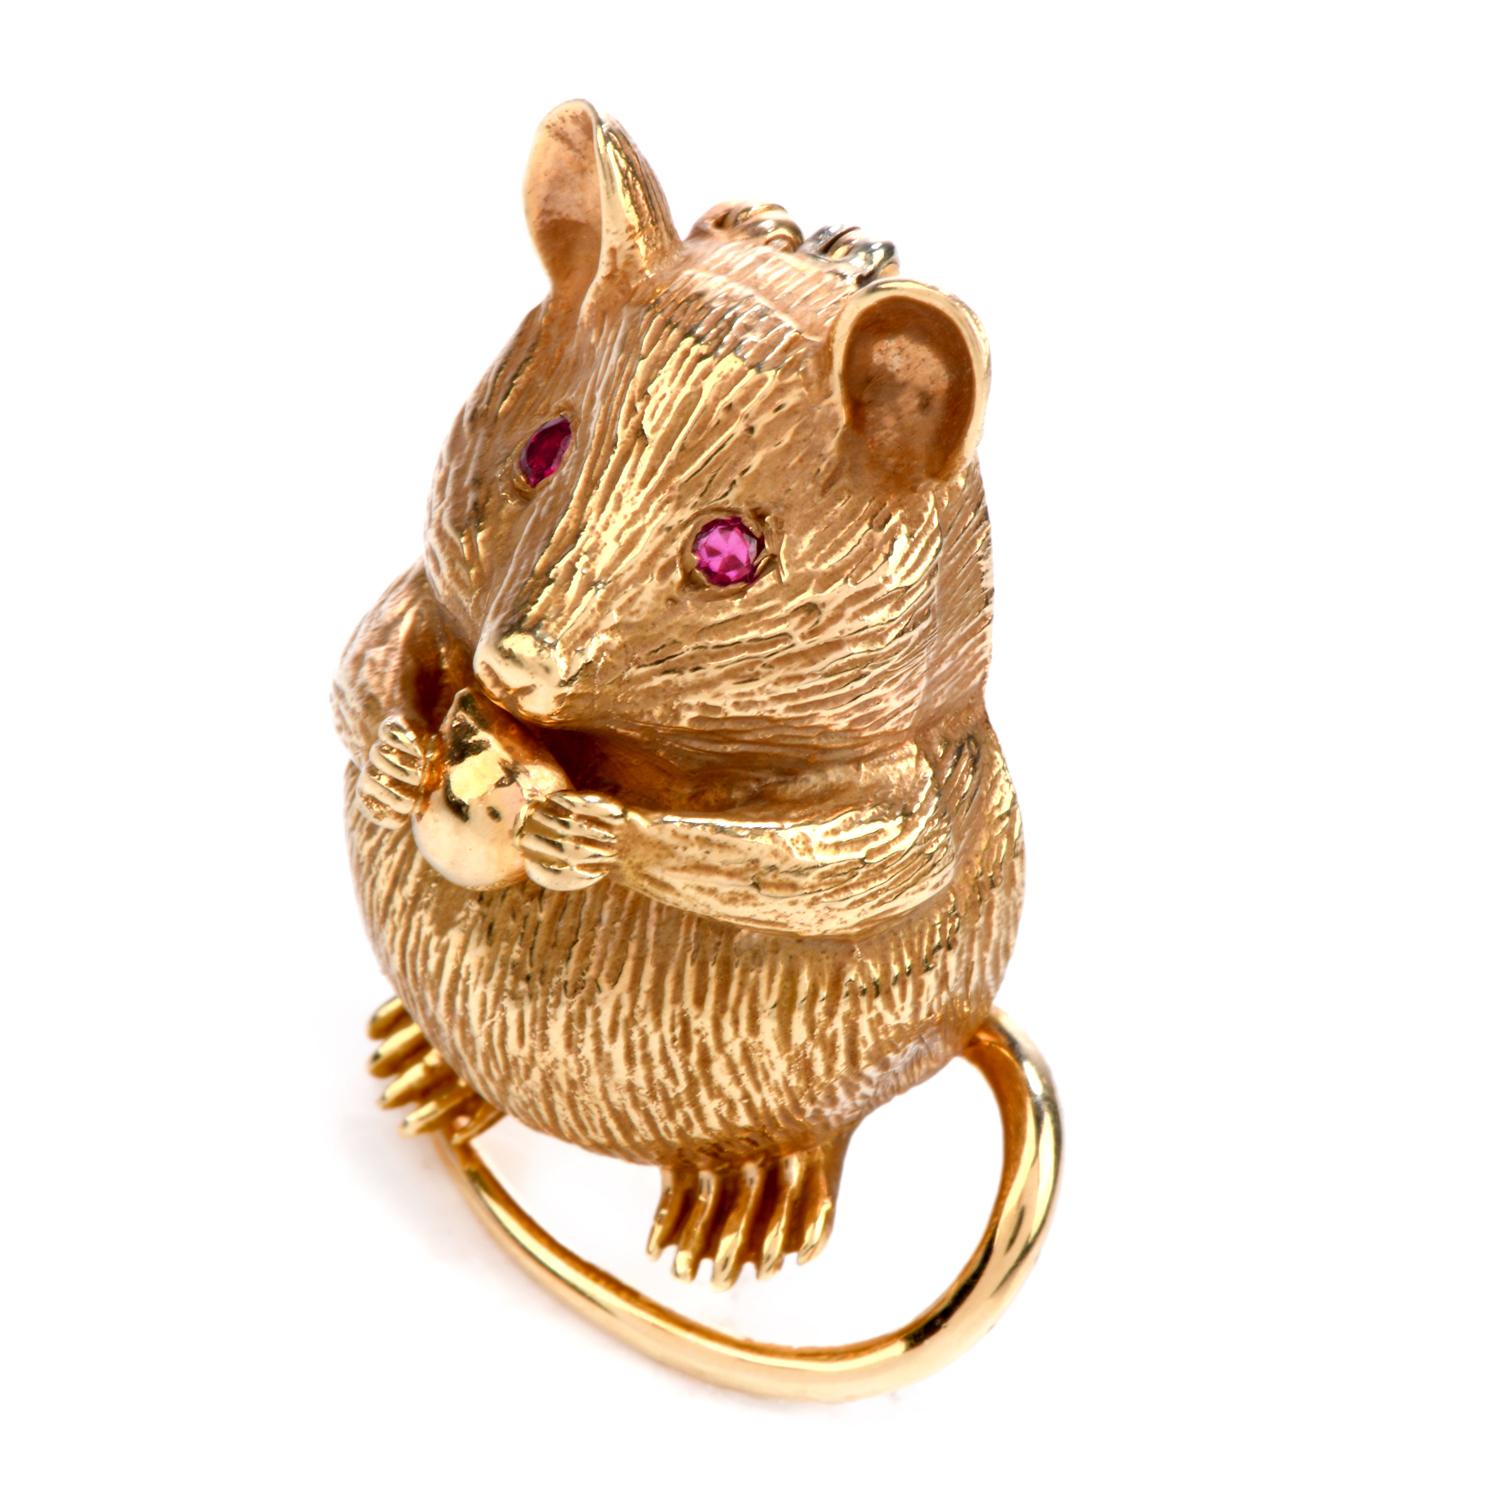 This charming Vintage Mouse Inspired Finely Textured Brooch & Pendant,

Crafted in 14K Yellow Gold,

It Is adorned in the Eyes by 2 genuine round cut Rubies, weighing approx. 0.06 carats,

With a Retractable Bale, it can be worn as a Pin or as a